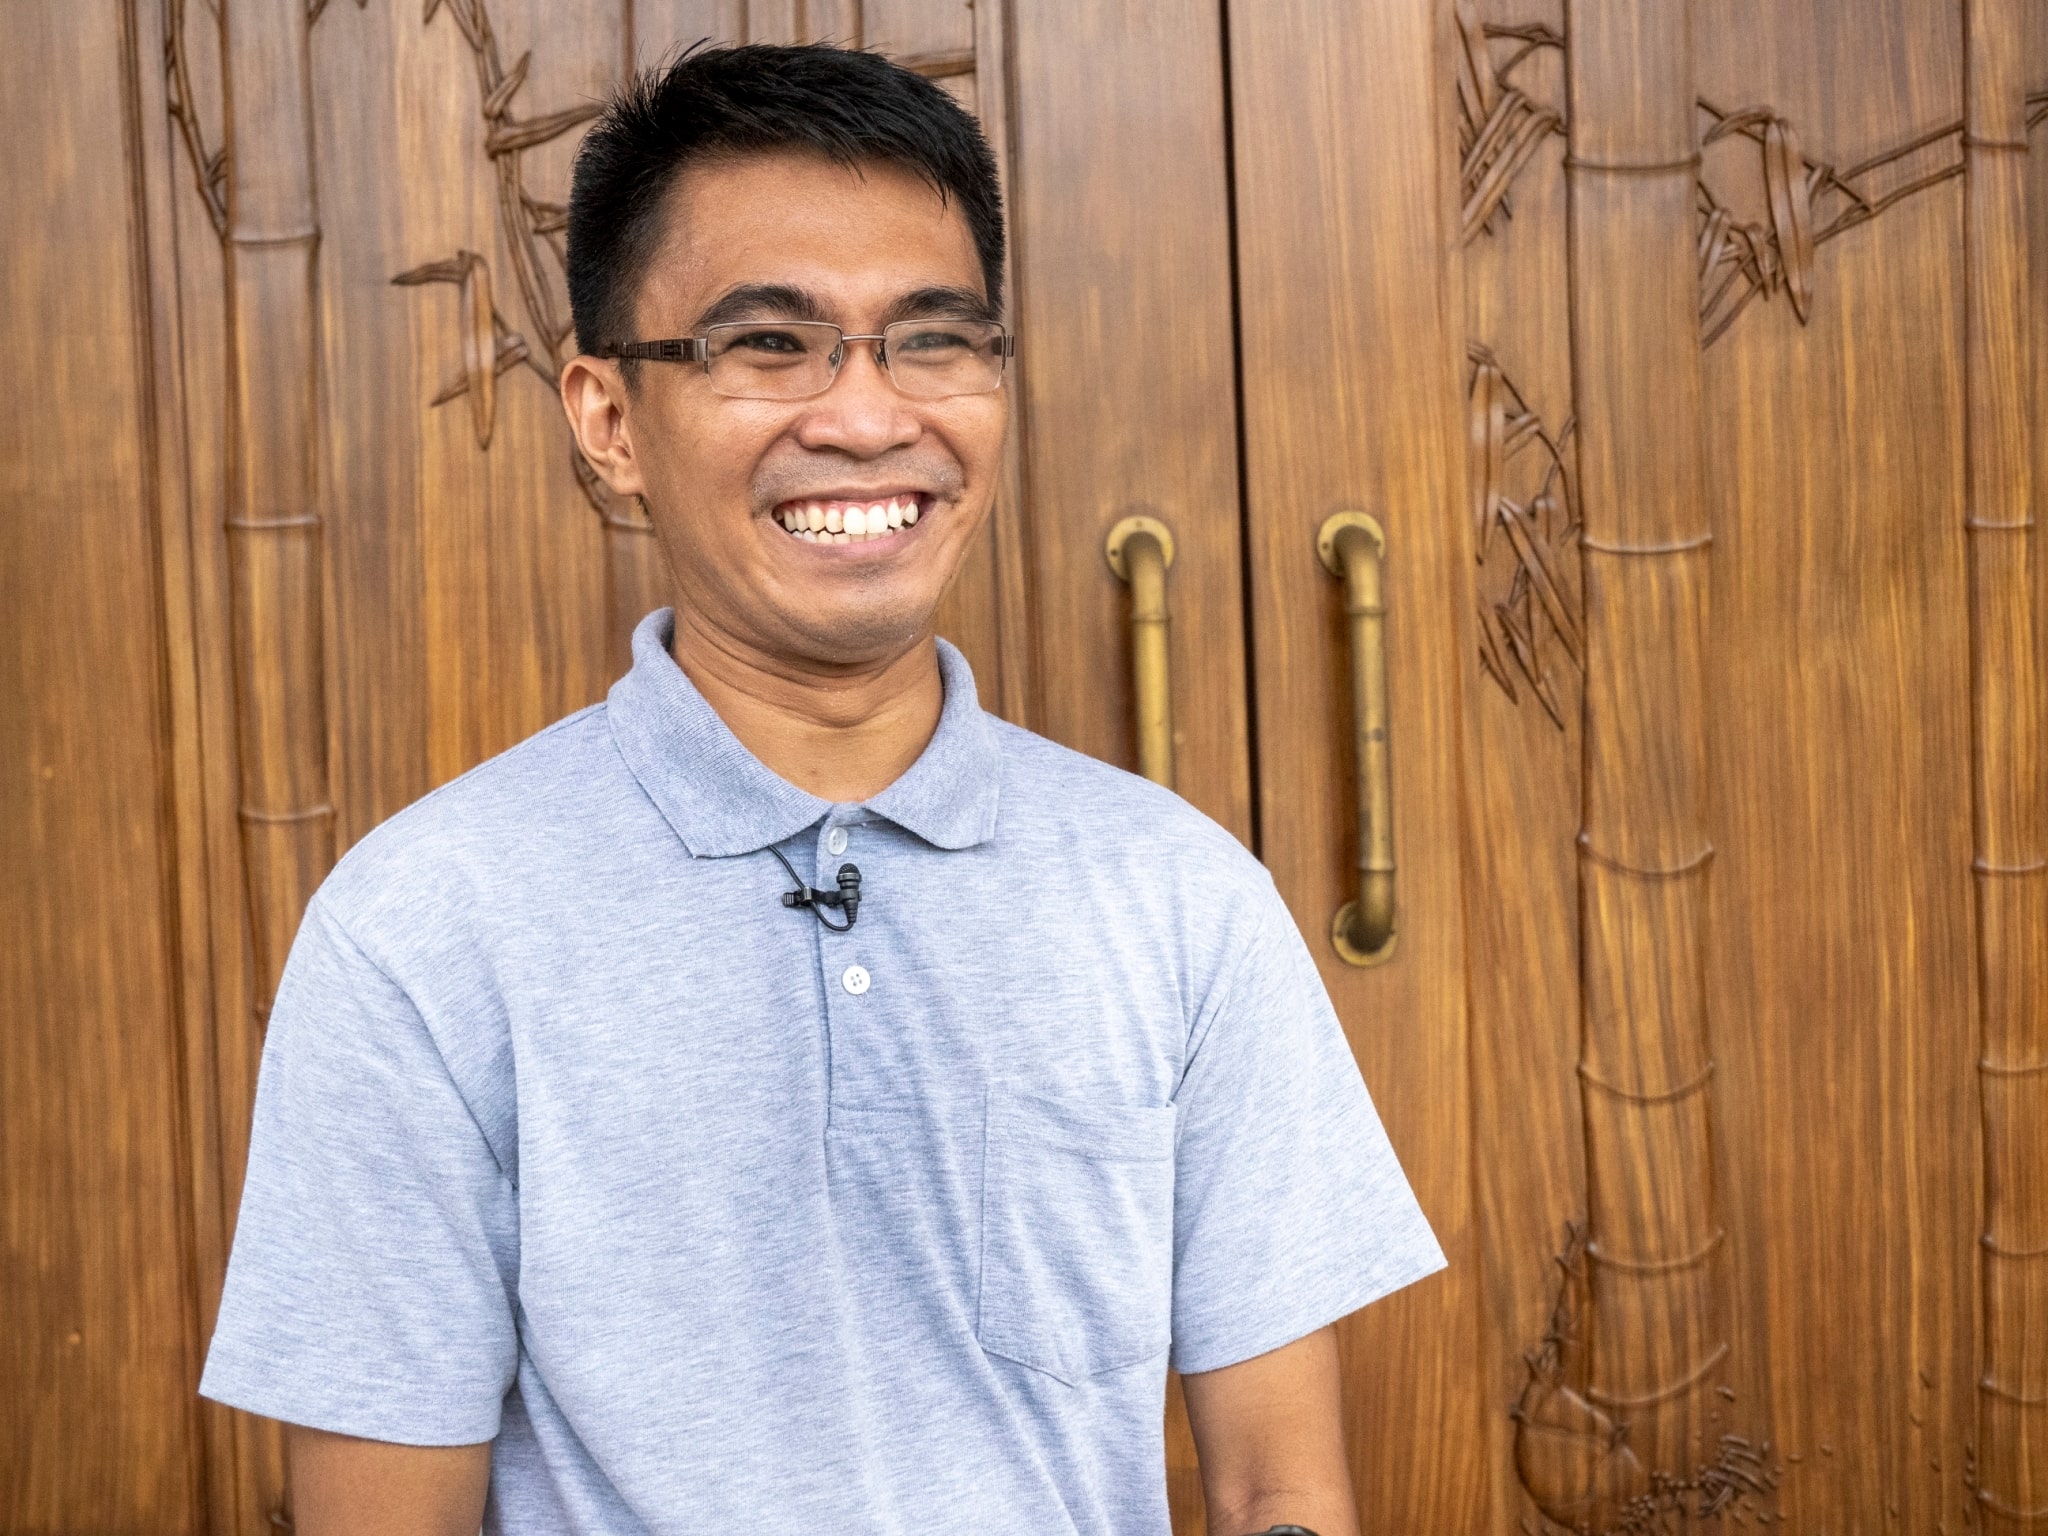  Volunteering even when he was a still a Tzu Chi scholar, Alberto Briongos Jr. is happy to reciprocate the kindness and generosity of his benefactor. 【Photo by Matt Serrano】